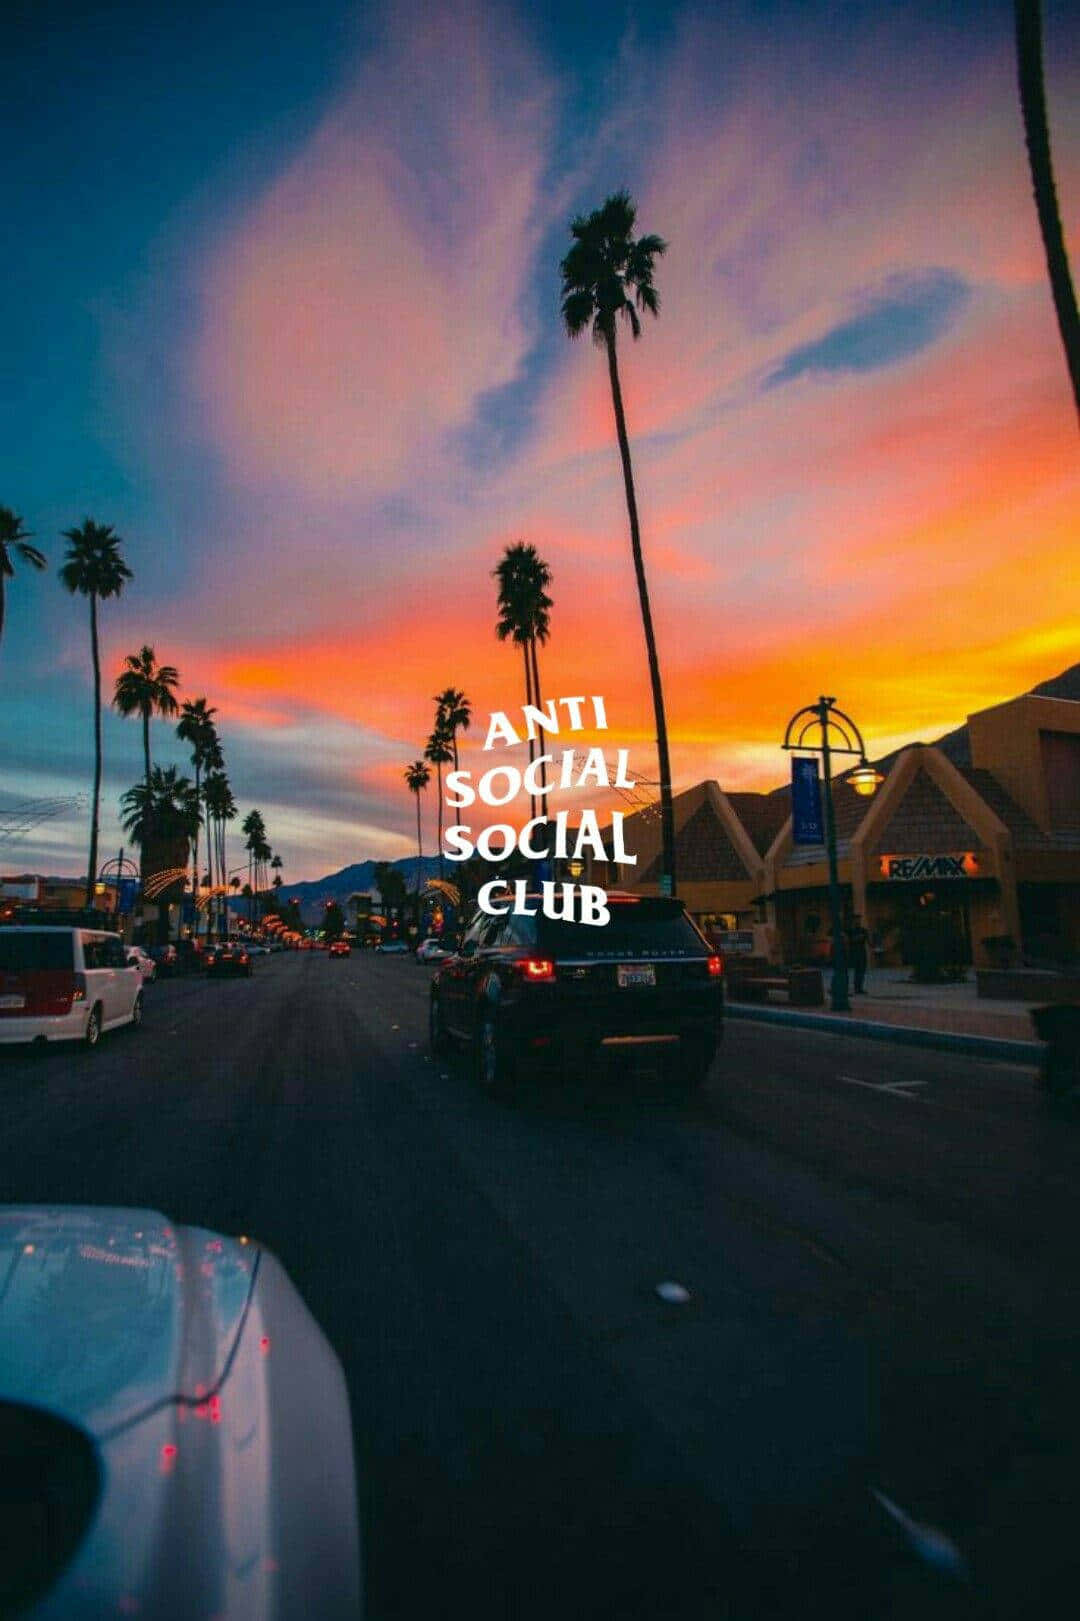 City Sunset And Anti Social Club Iphone Wallpaper